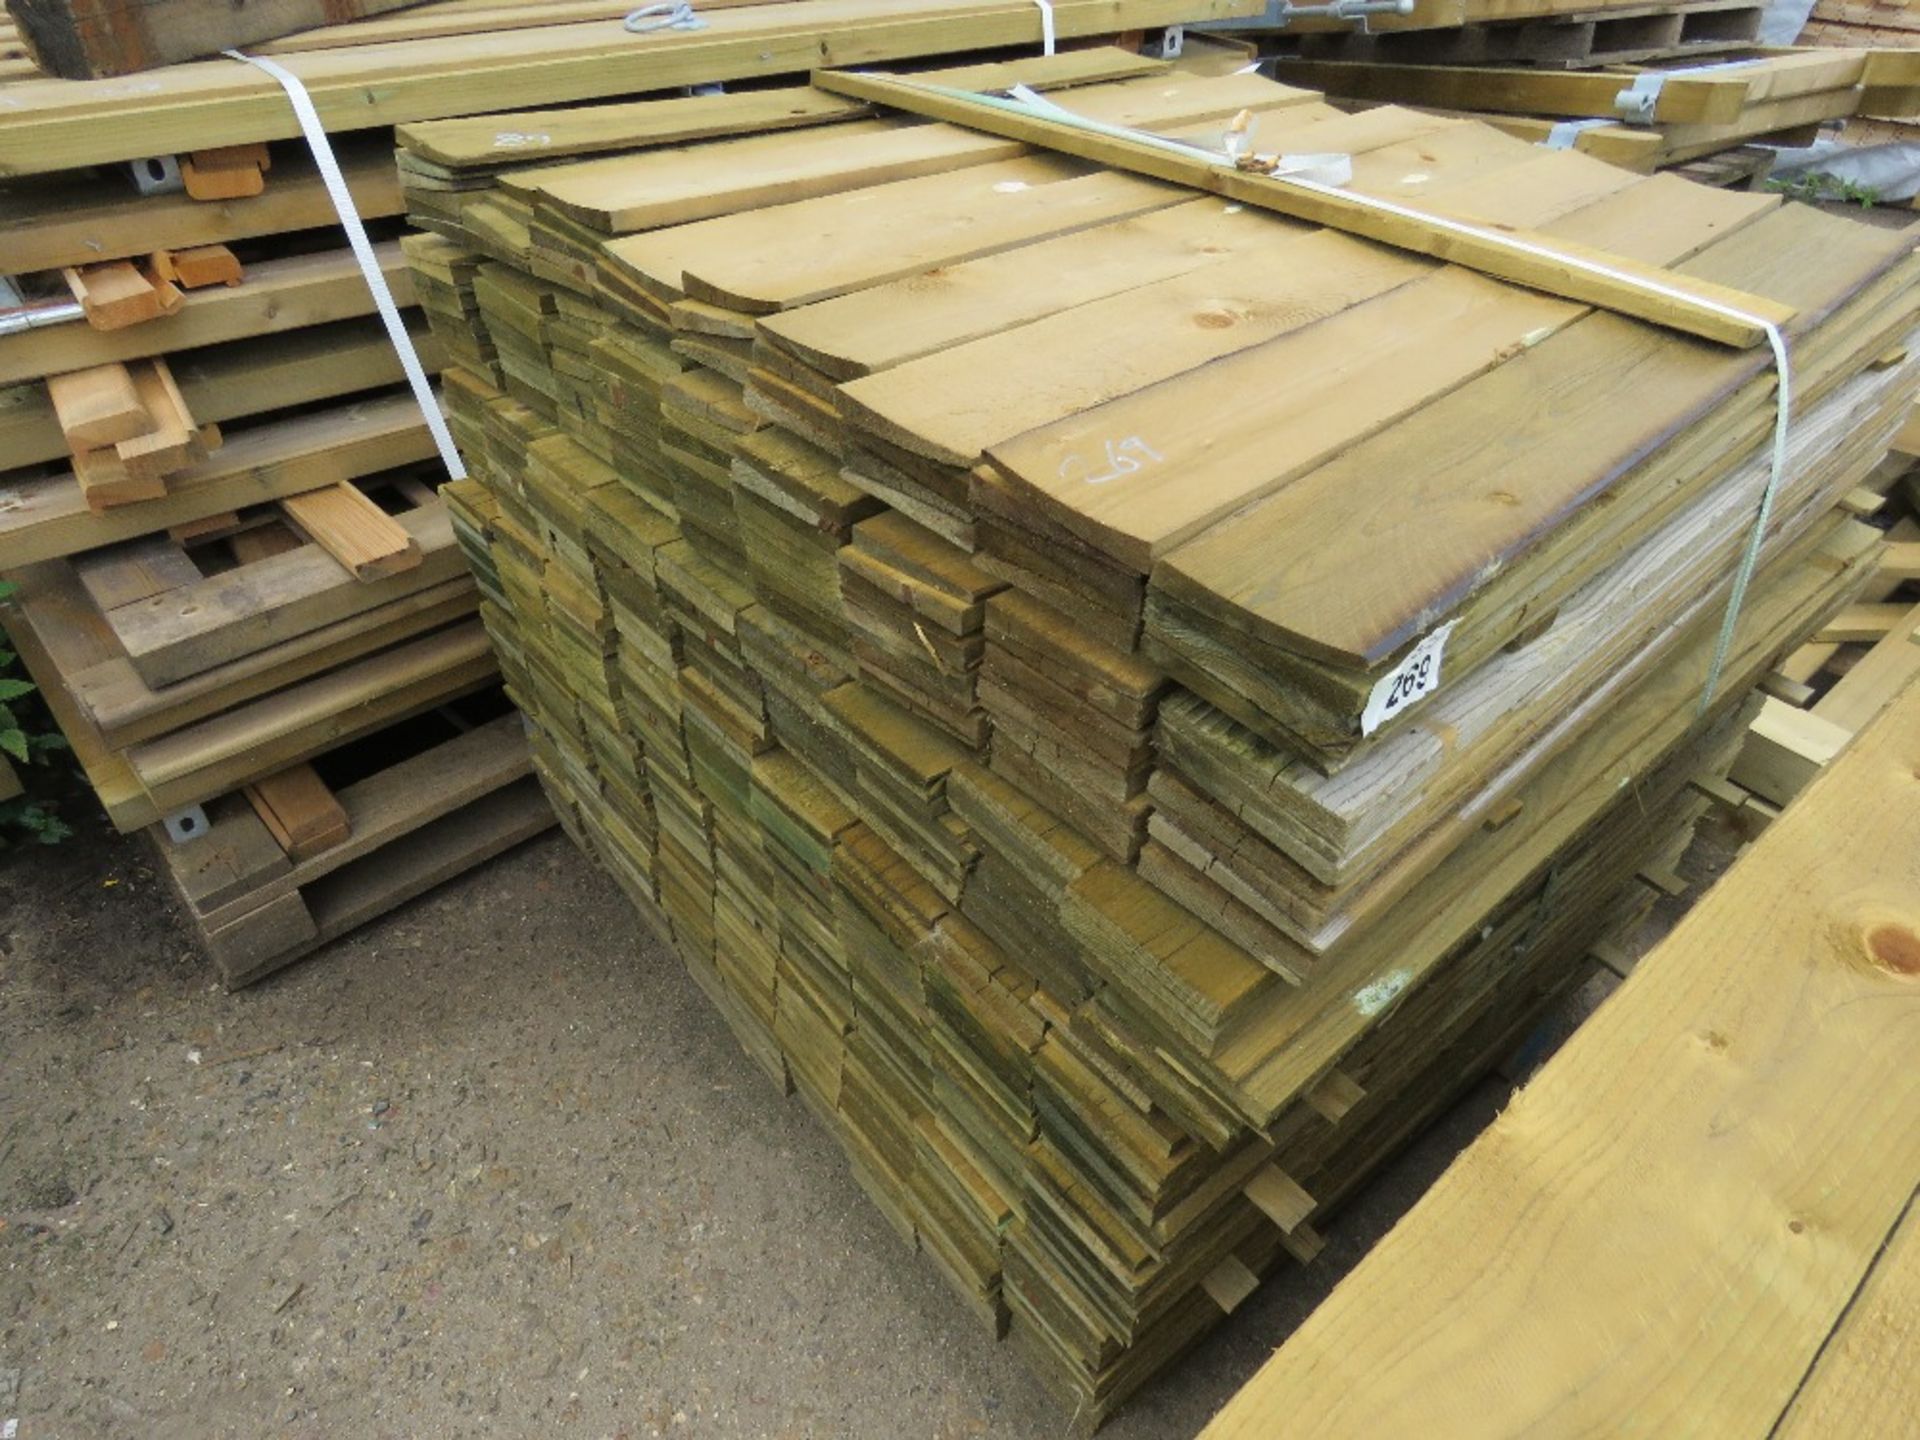 PACK OF FEATHER EDGE FENCE CLADDING TIMBER BOARDS, 0.89M LENGTH X 10CM WIDTH APPROX.